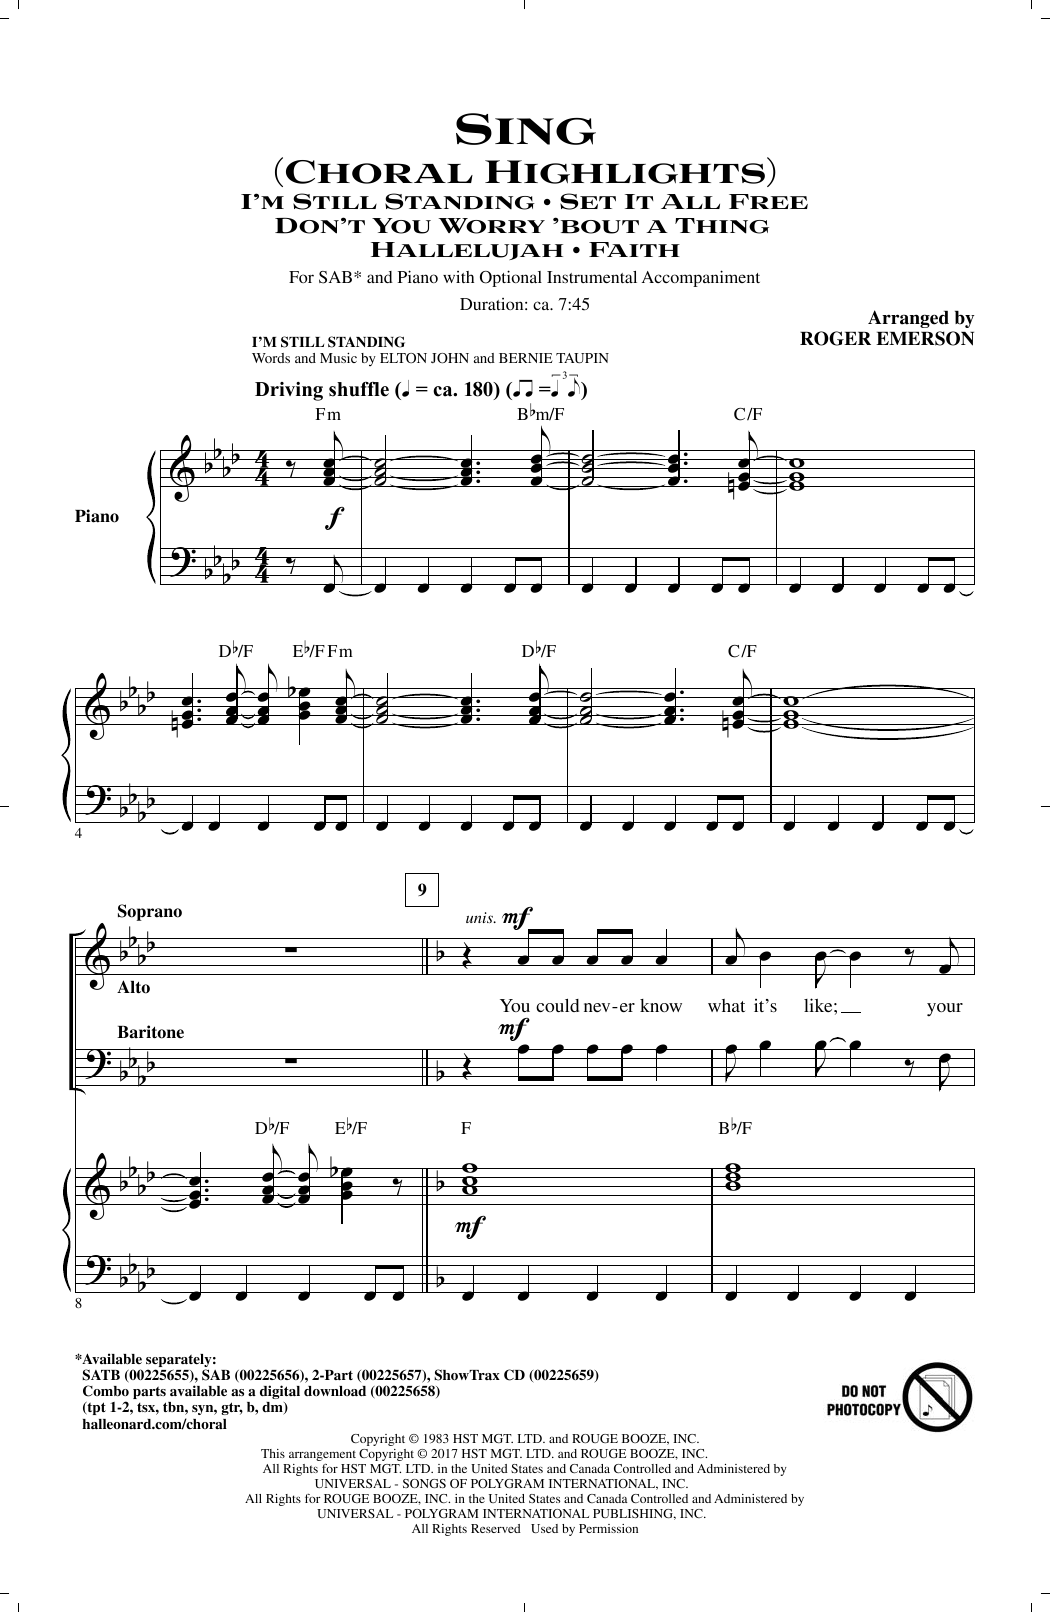 Download Roger Emerson Sing (Choral Highlights) Sheet Music